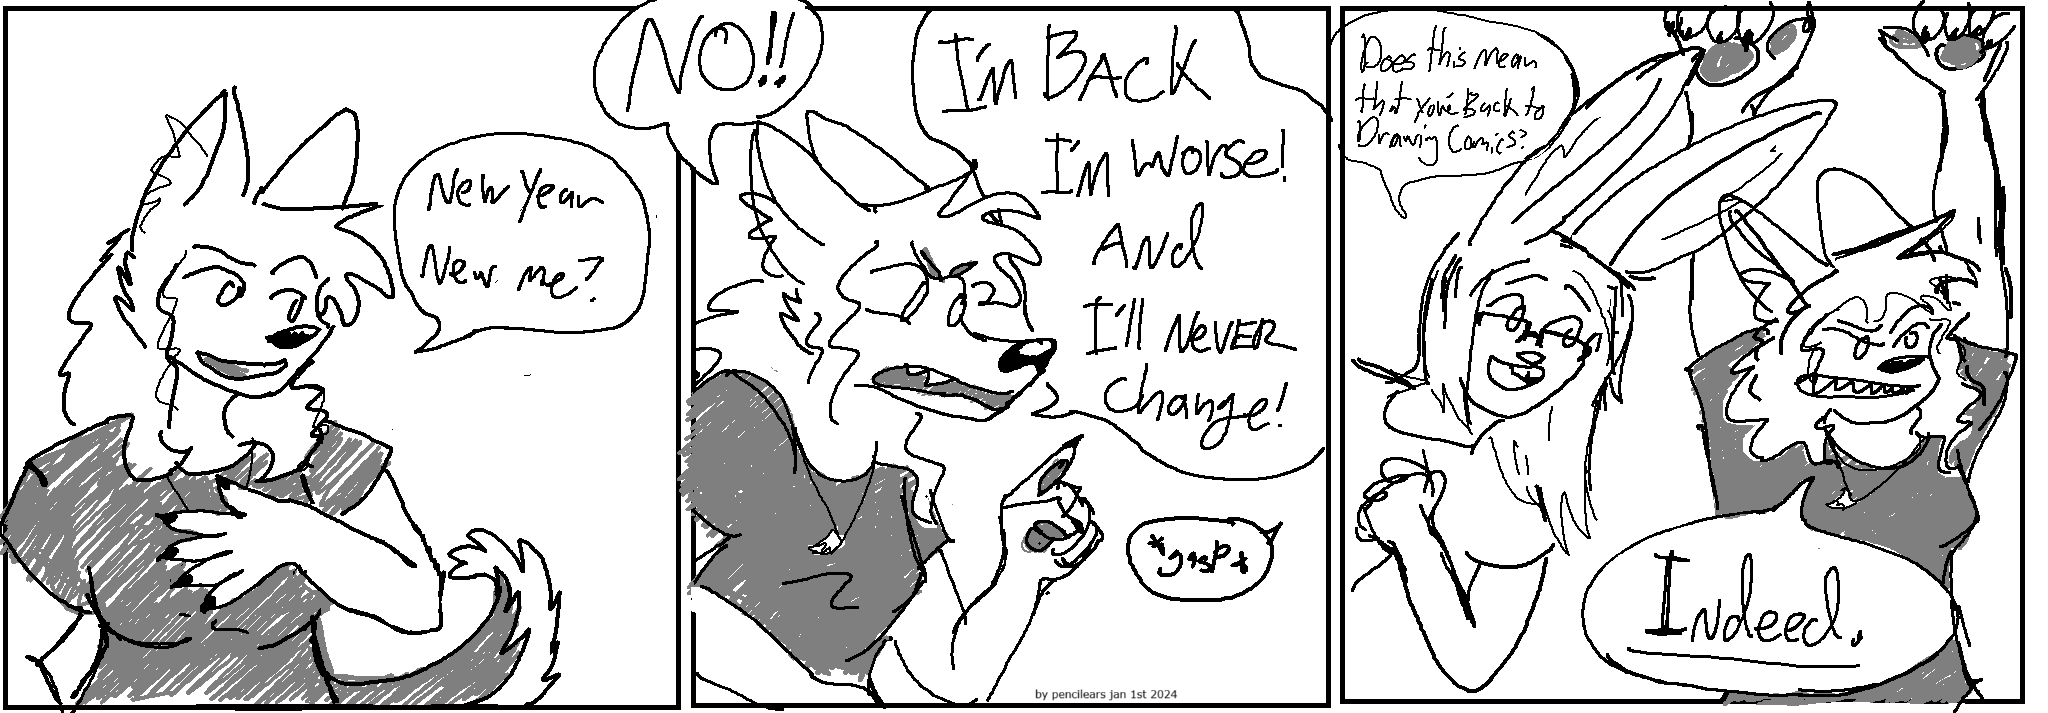 panel 1: "new year new me?" "NO!"
panel 2: "I'm back, I'm worse and I'll never change!" 
a tiny gasp from offstage, panel three: andrew the bunny girl says: "does this mean that you're back to drawing comics?" me: "INDEED!"